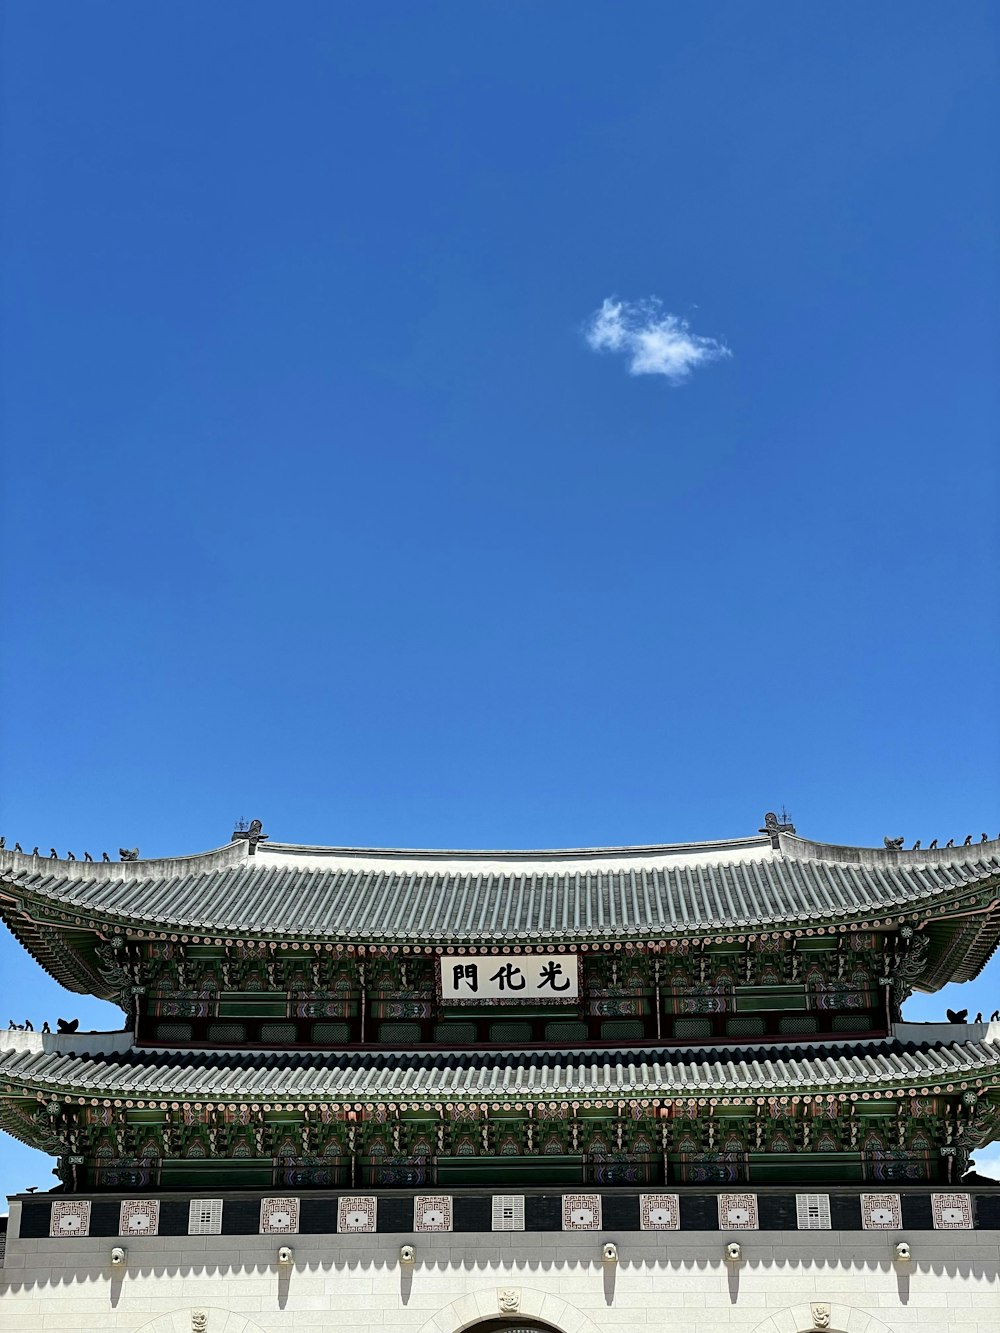 green and white temple under blue sky during daytime